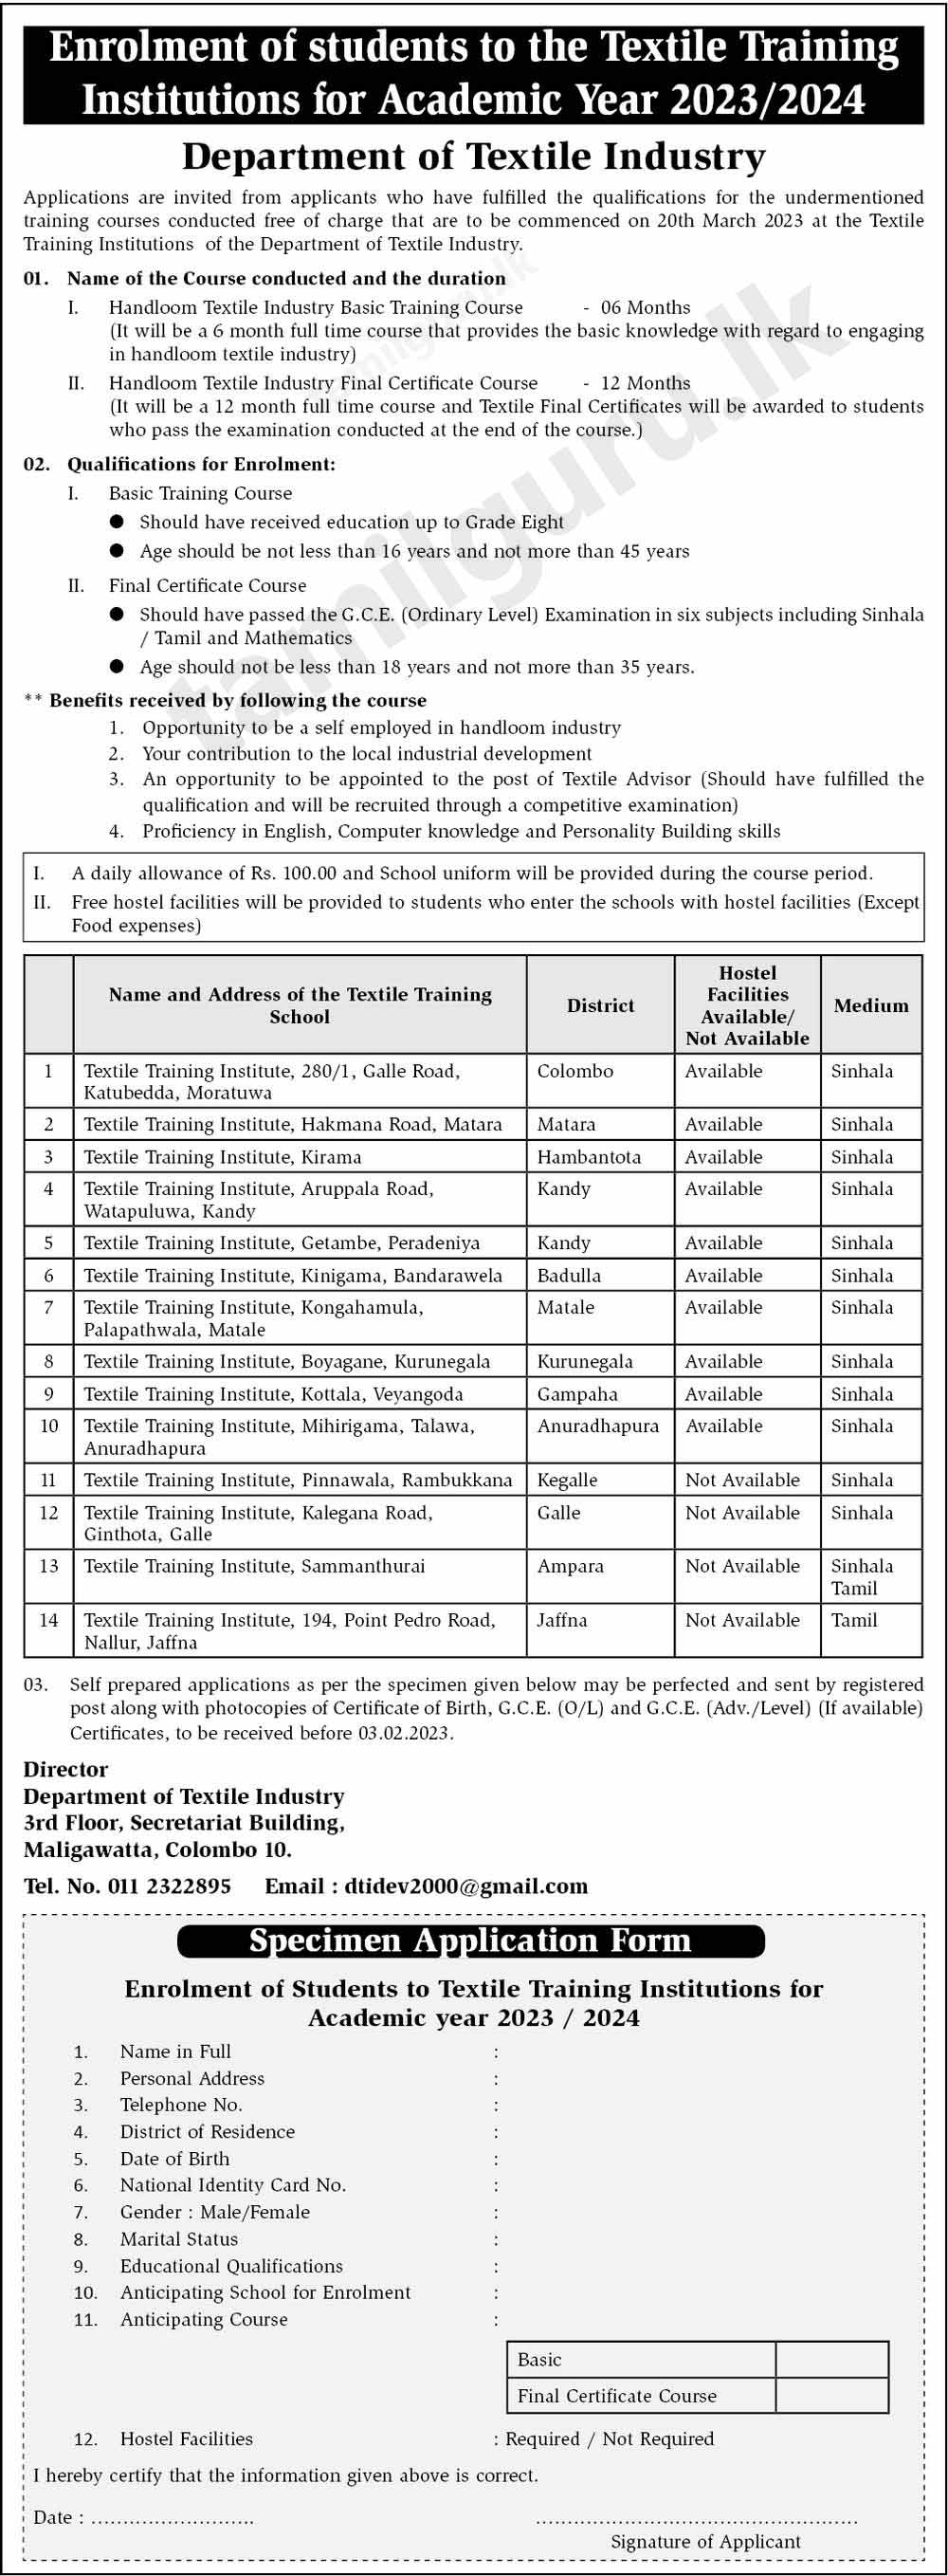 Admission for Textile Industry Training Institutions (Courses) 2023/2024 - Department of Textile Industry